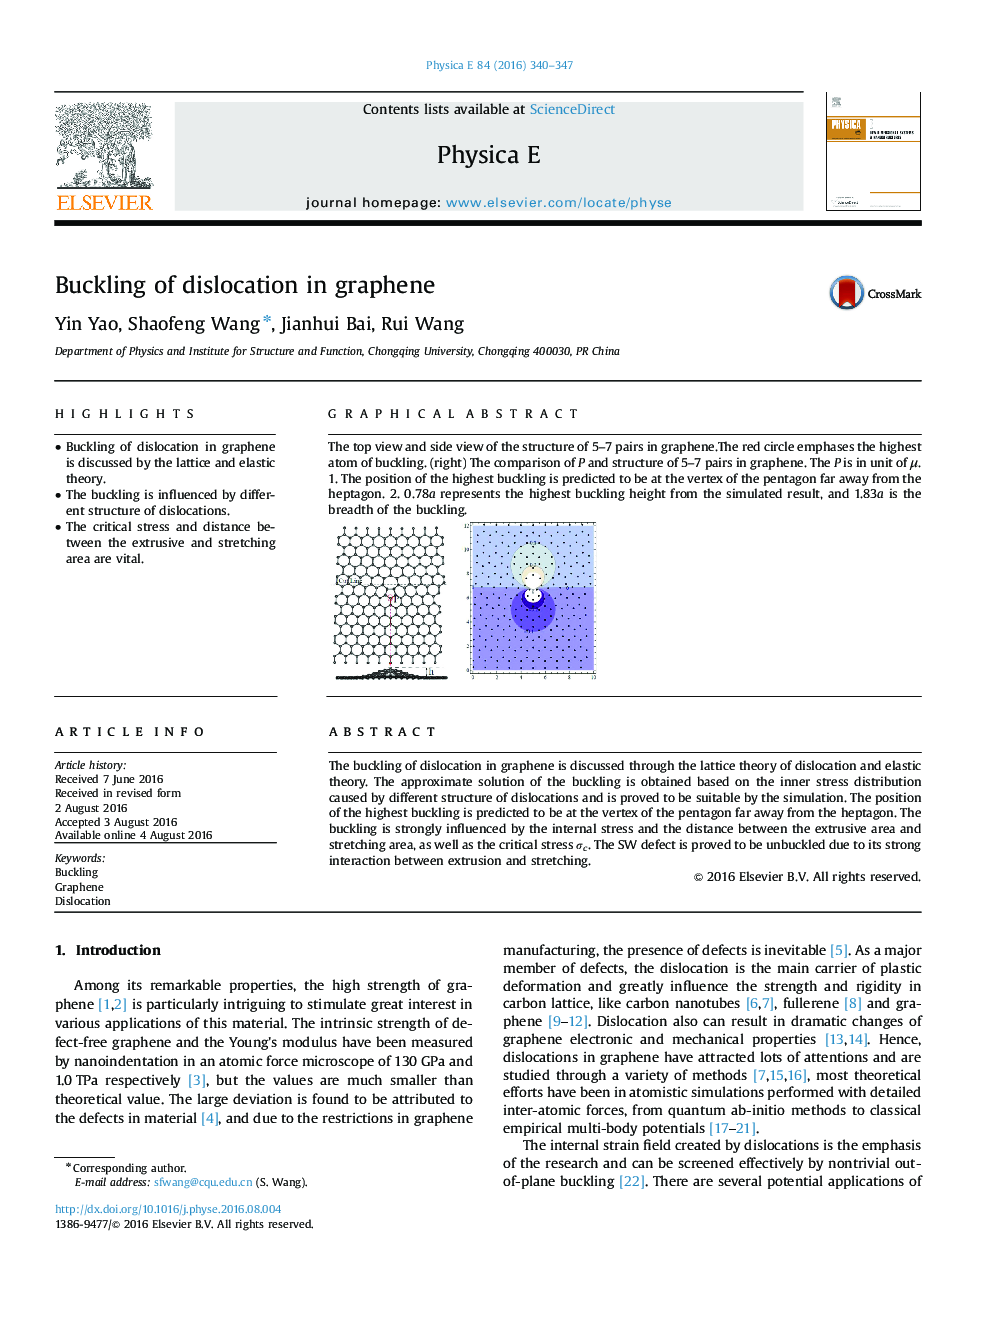 Buckling of dislocation in graphene